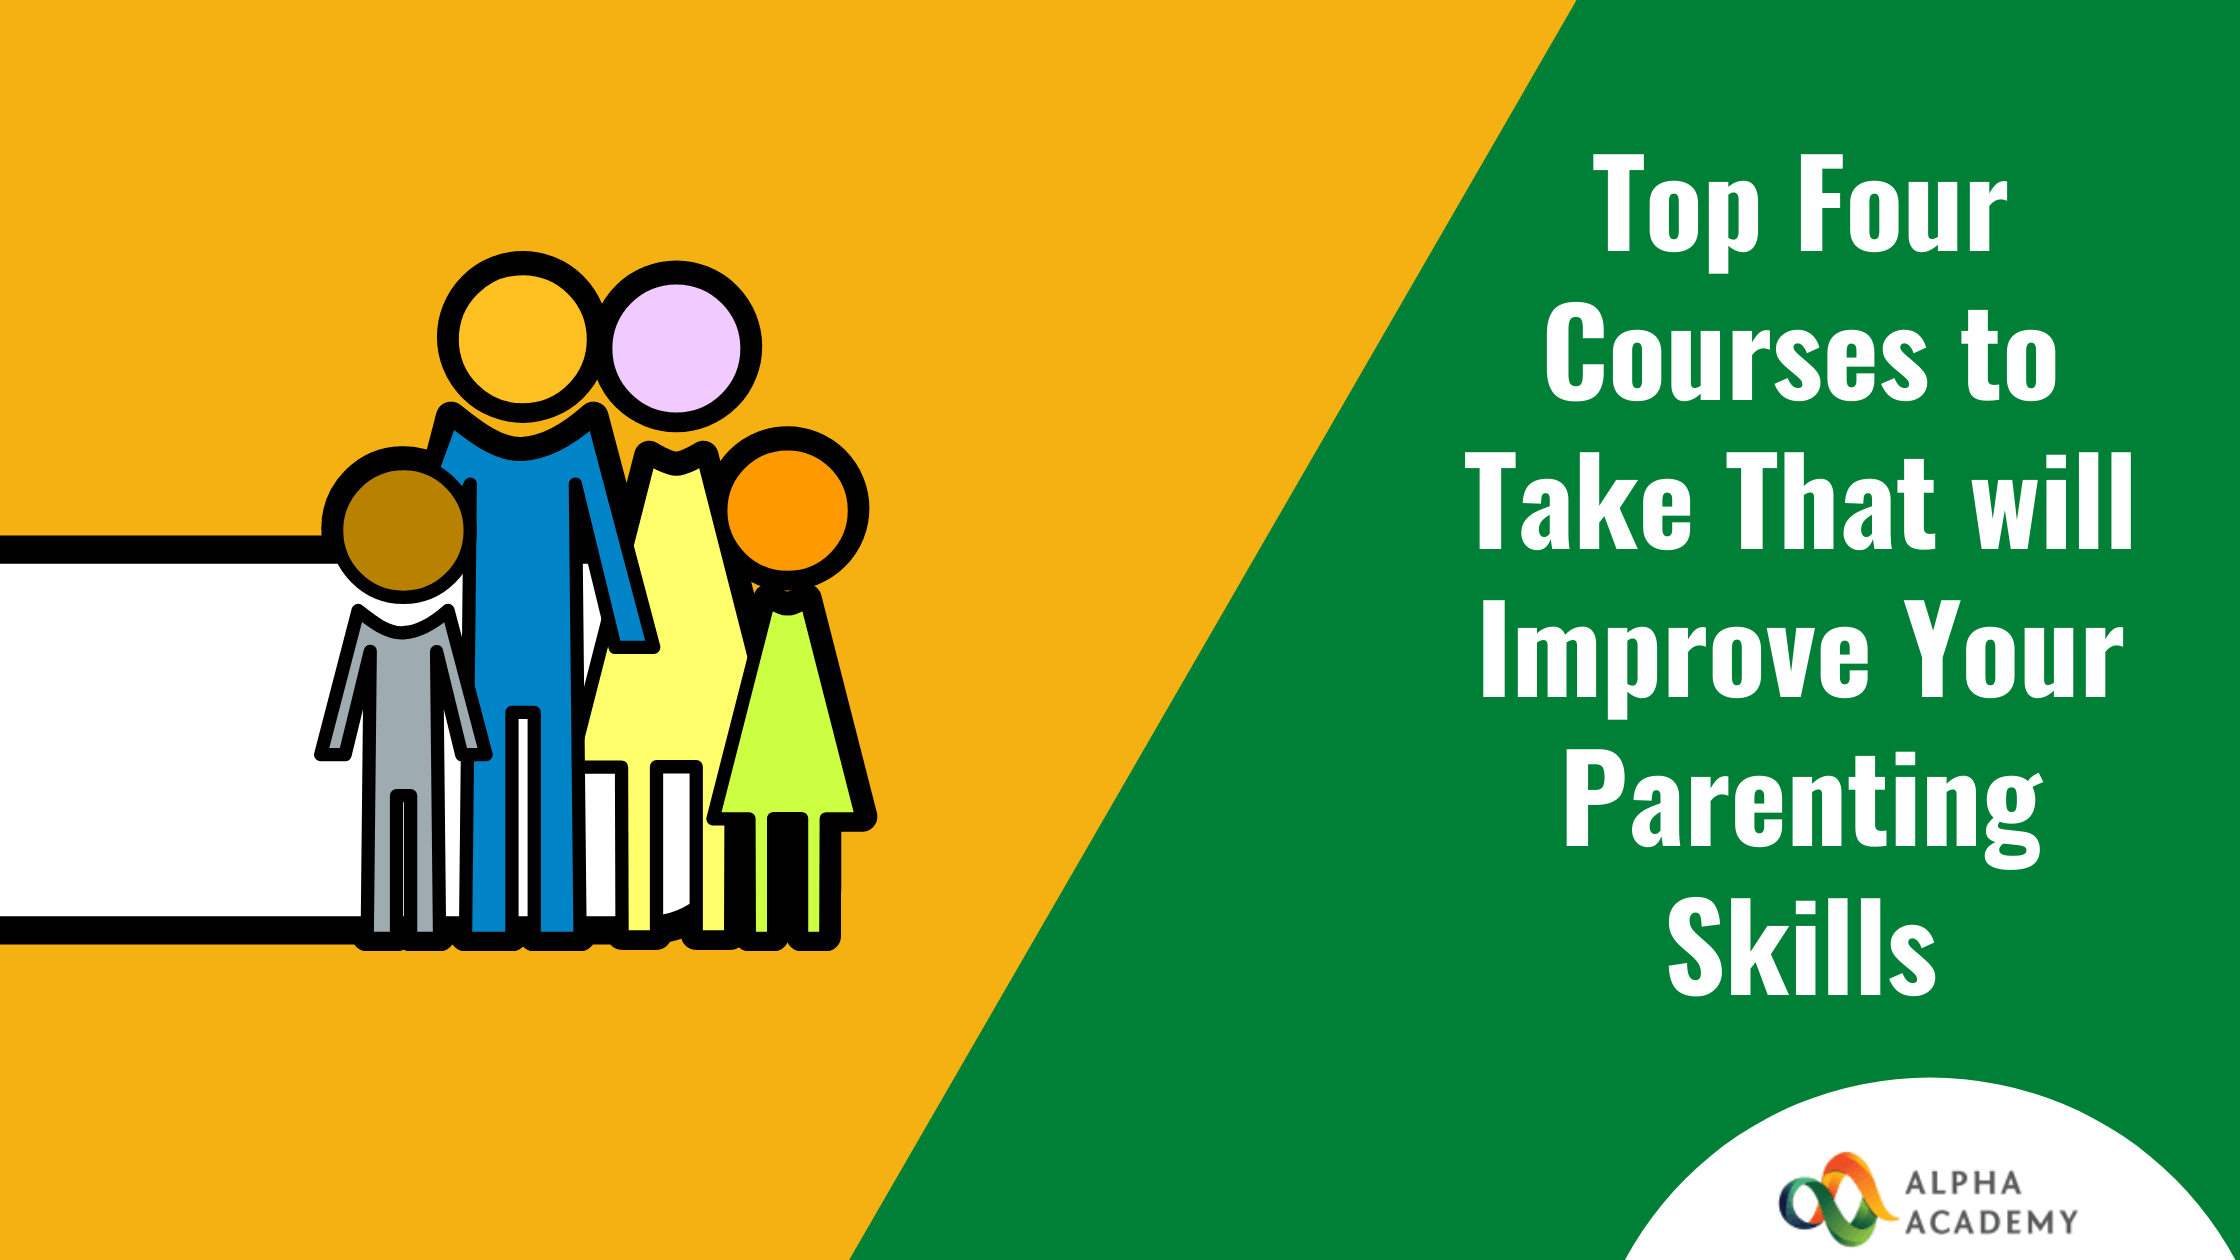 Courses to Improve Your Parenting Skills